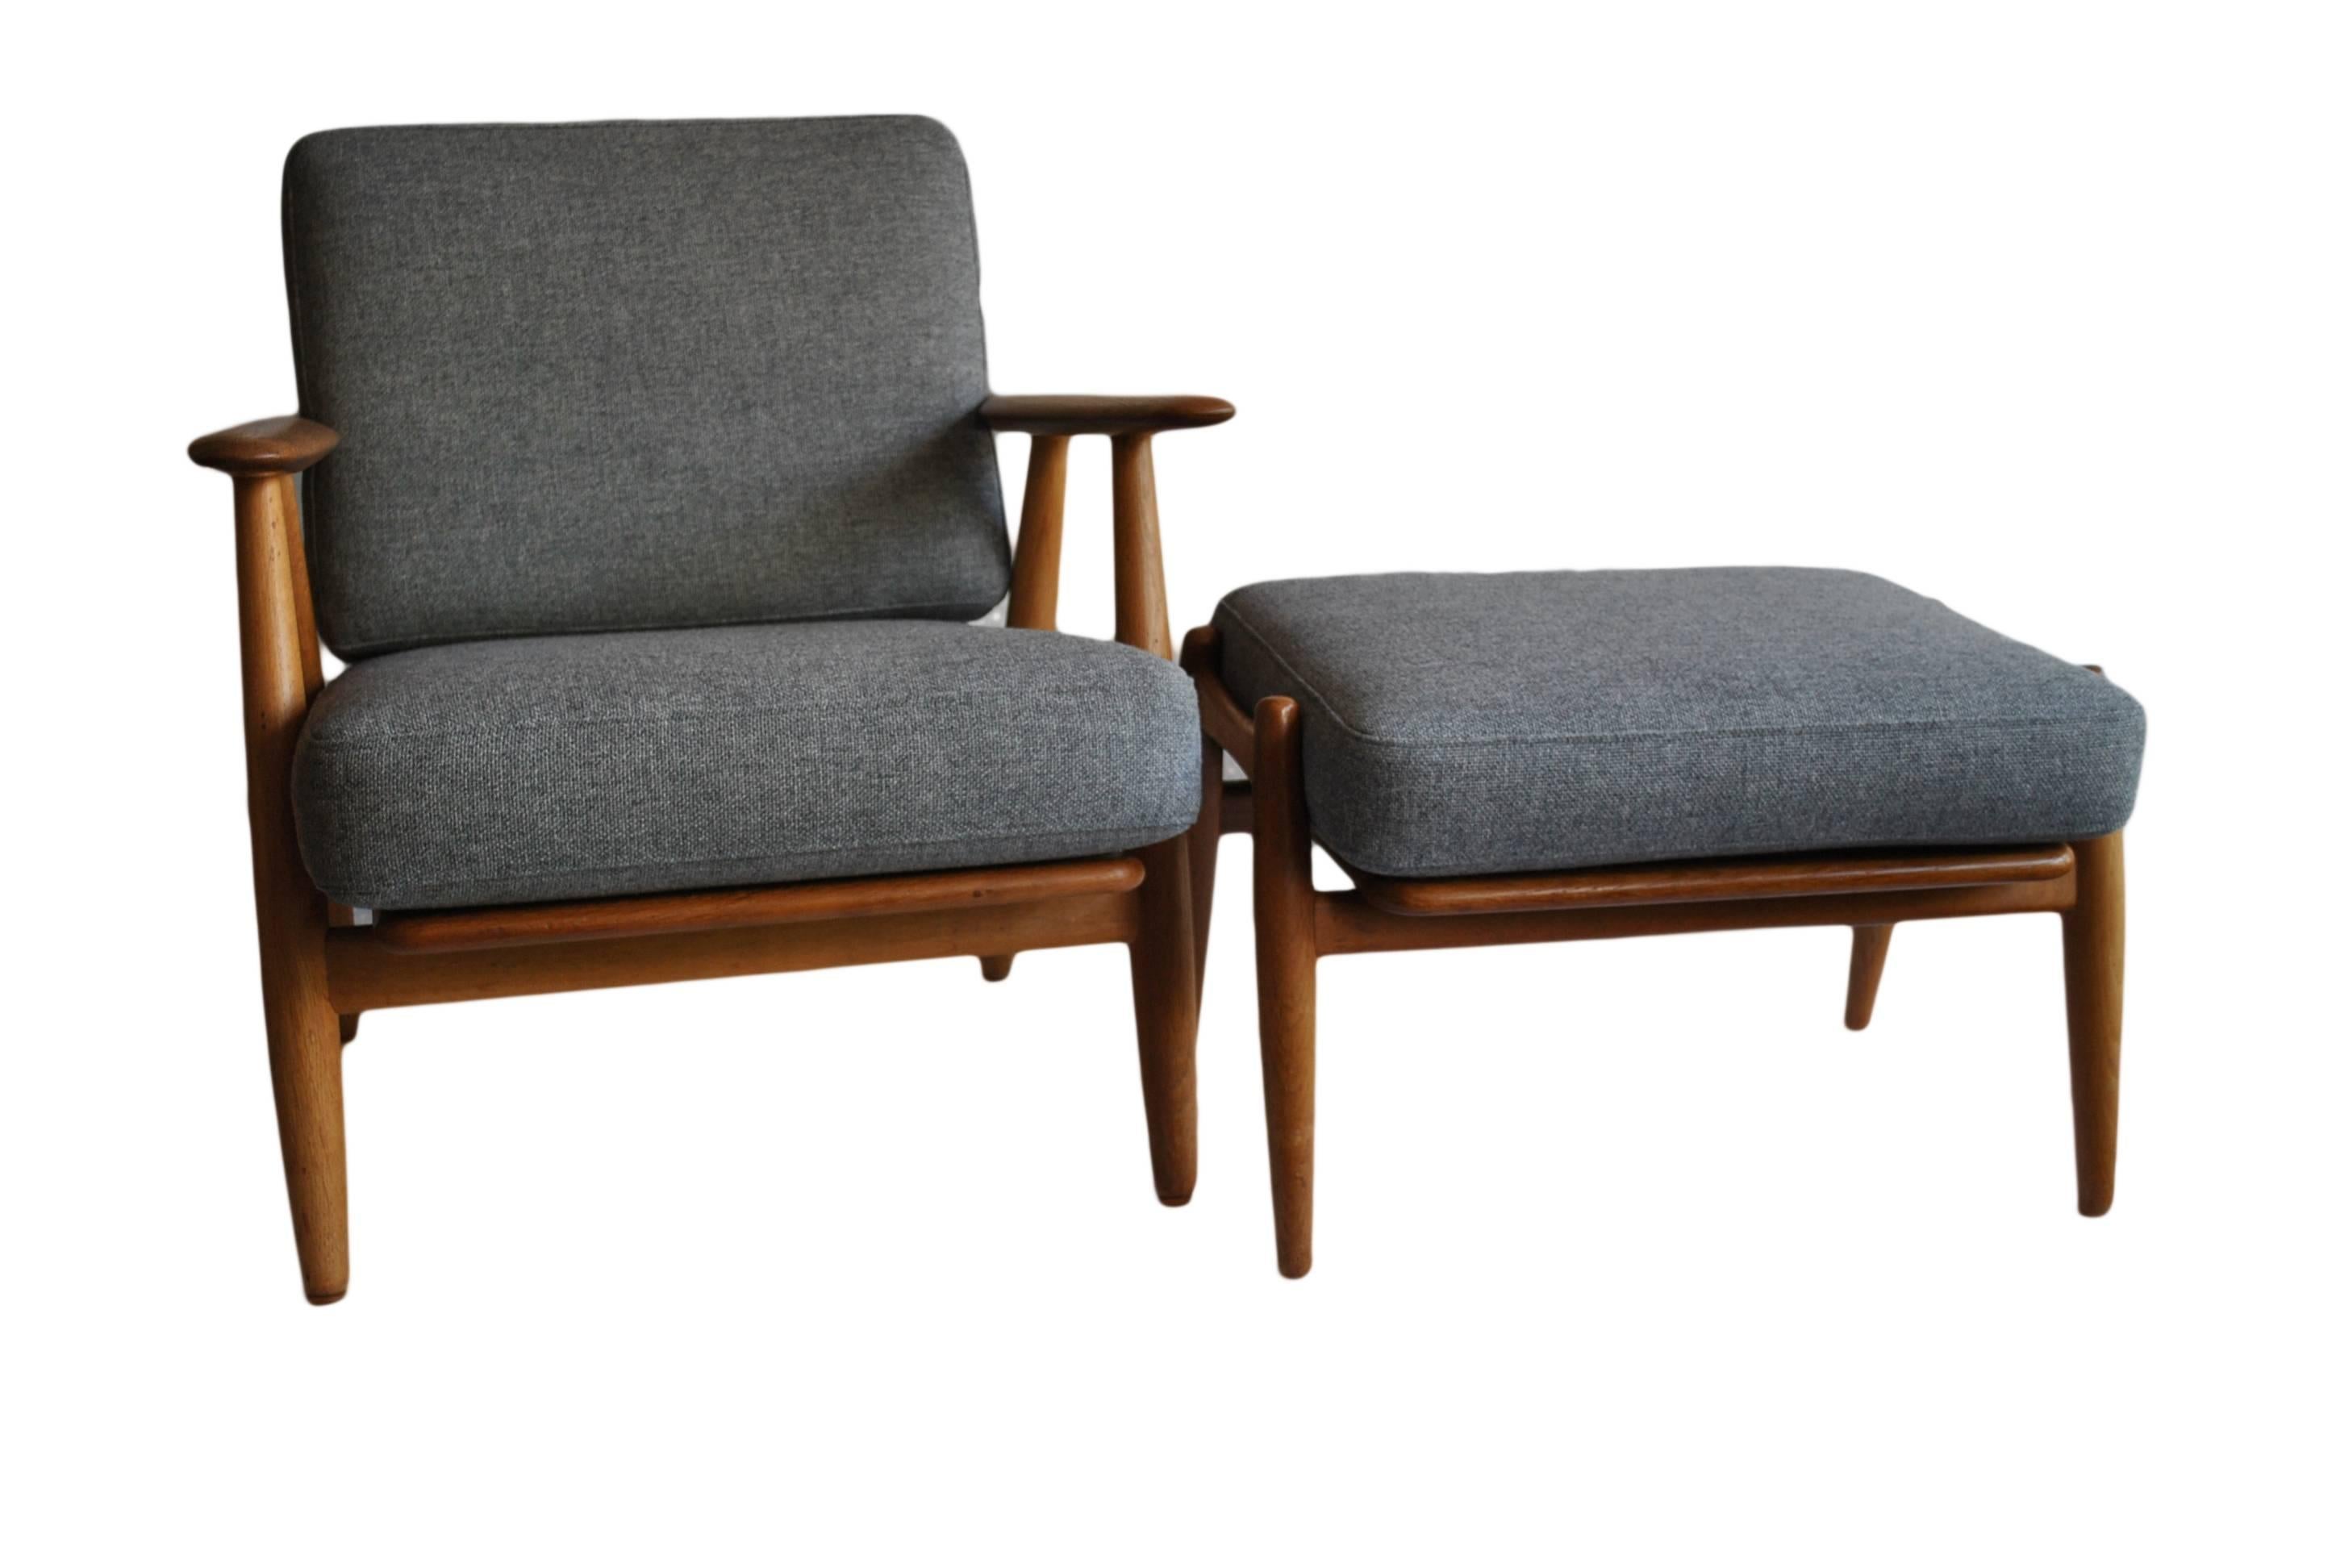 Excellent condition oak frame Model GE240 'cigar' chair. Designed by Hans J Wegner for Getama, Denmark, circa 1955. Bearing the original makers mark to the underside.
This has been re-upholstered in a grey wool/cotton Danish weave but can be